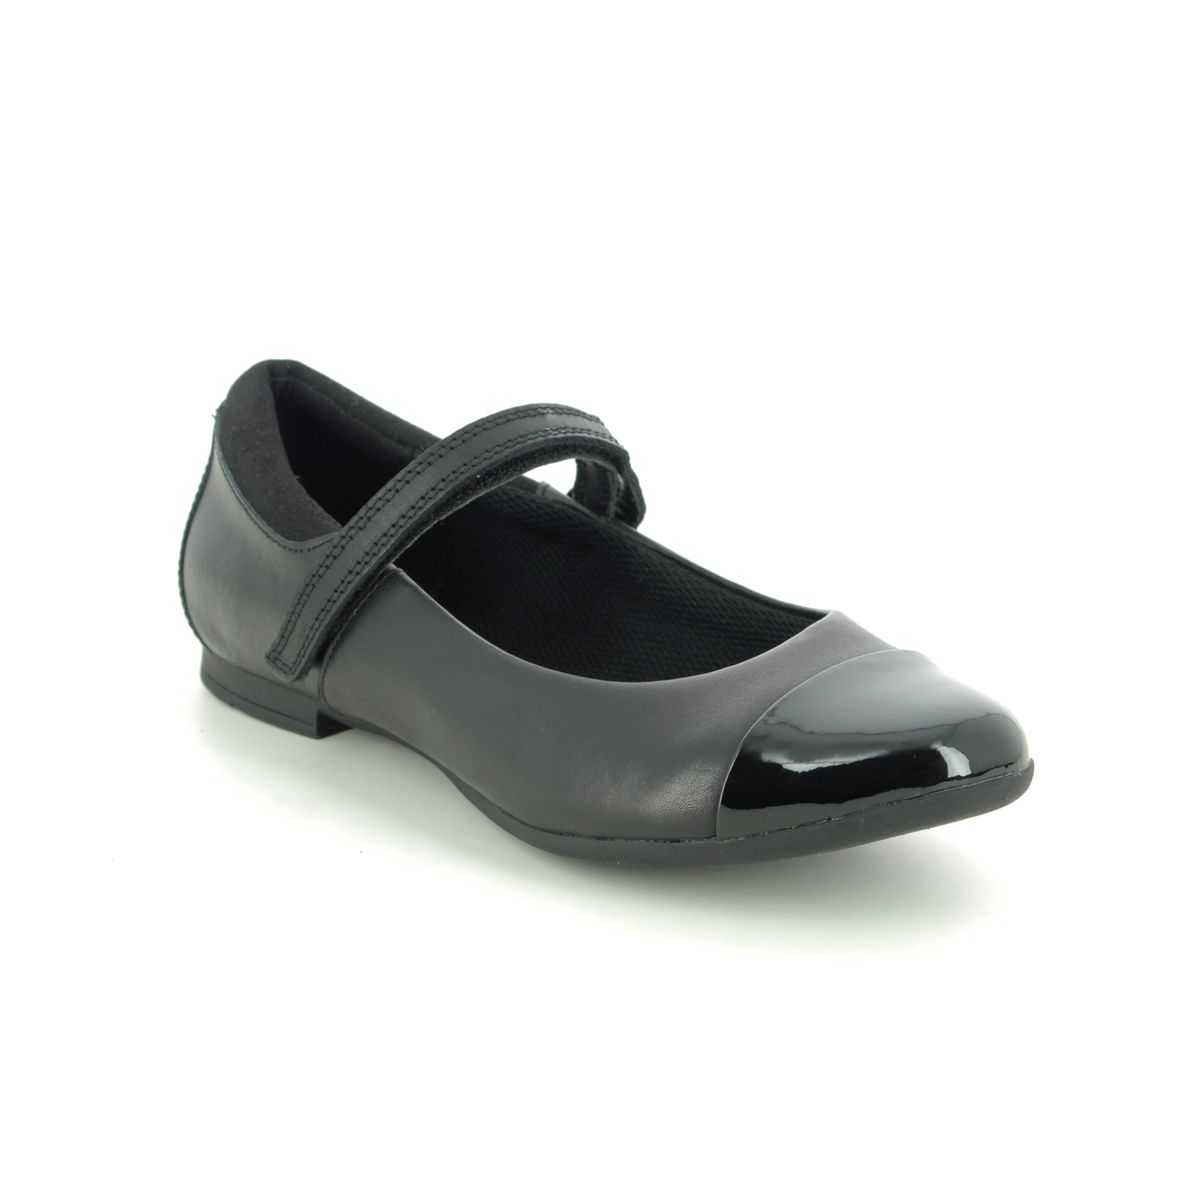 Clarks Scala Gem Y Black Leather Kids Girls School Shoes 495575E In Size 4.5 In Plain Black Leather E Width Fitting Narrow Fit For School For kids